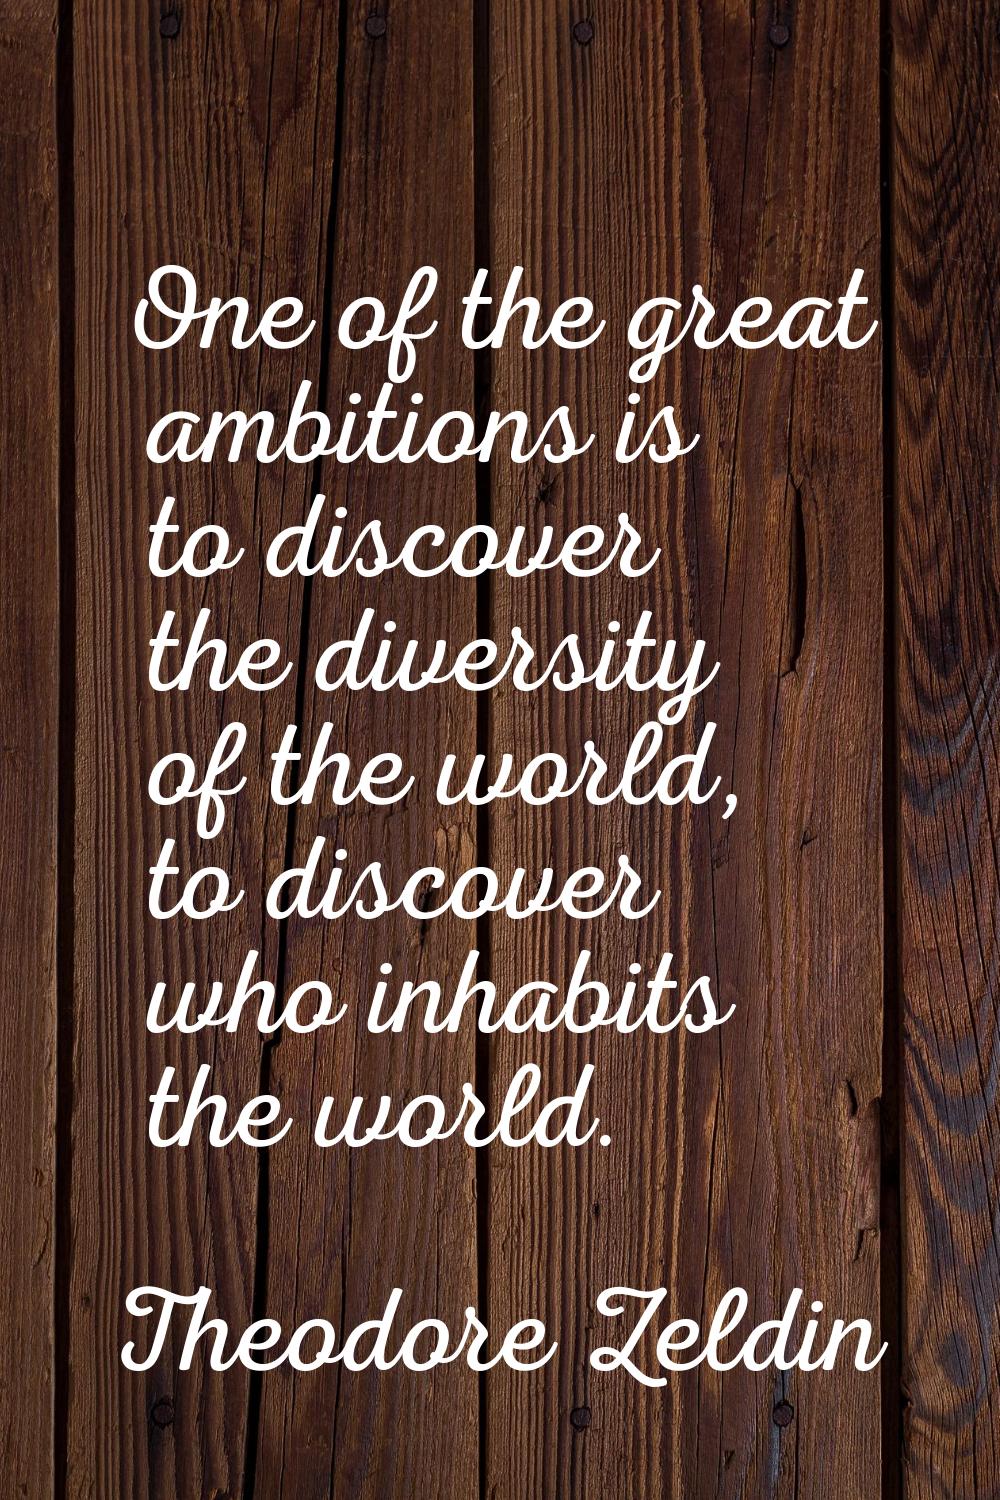 One of the great ambitions is to discover the diversity of the world, to discover who inhabits the 